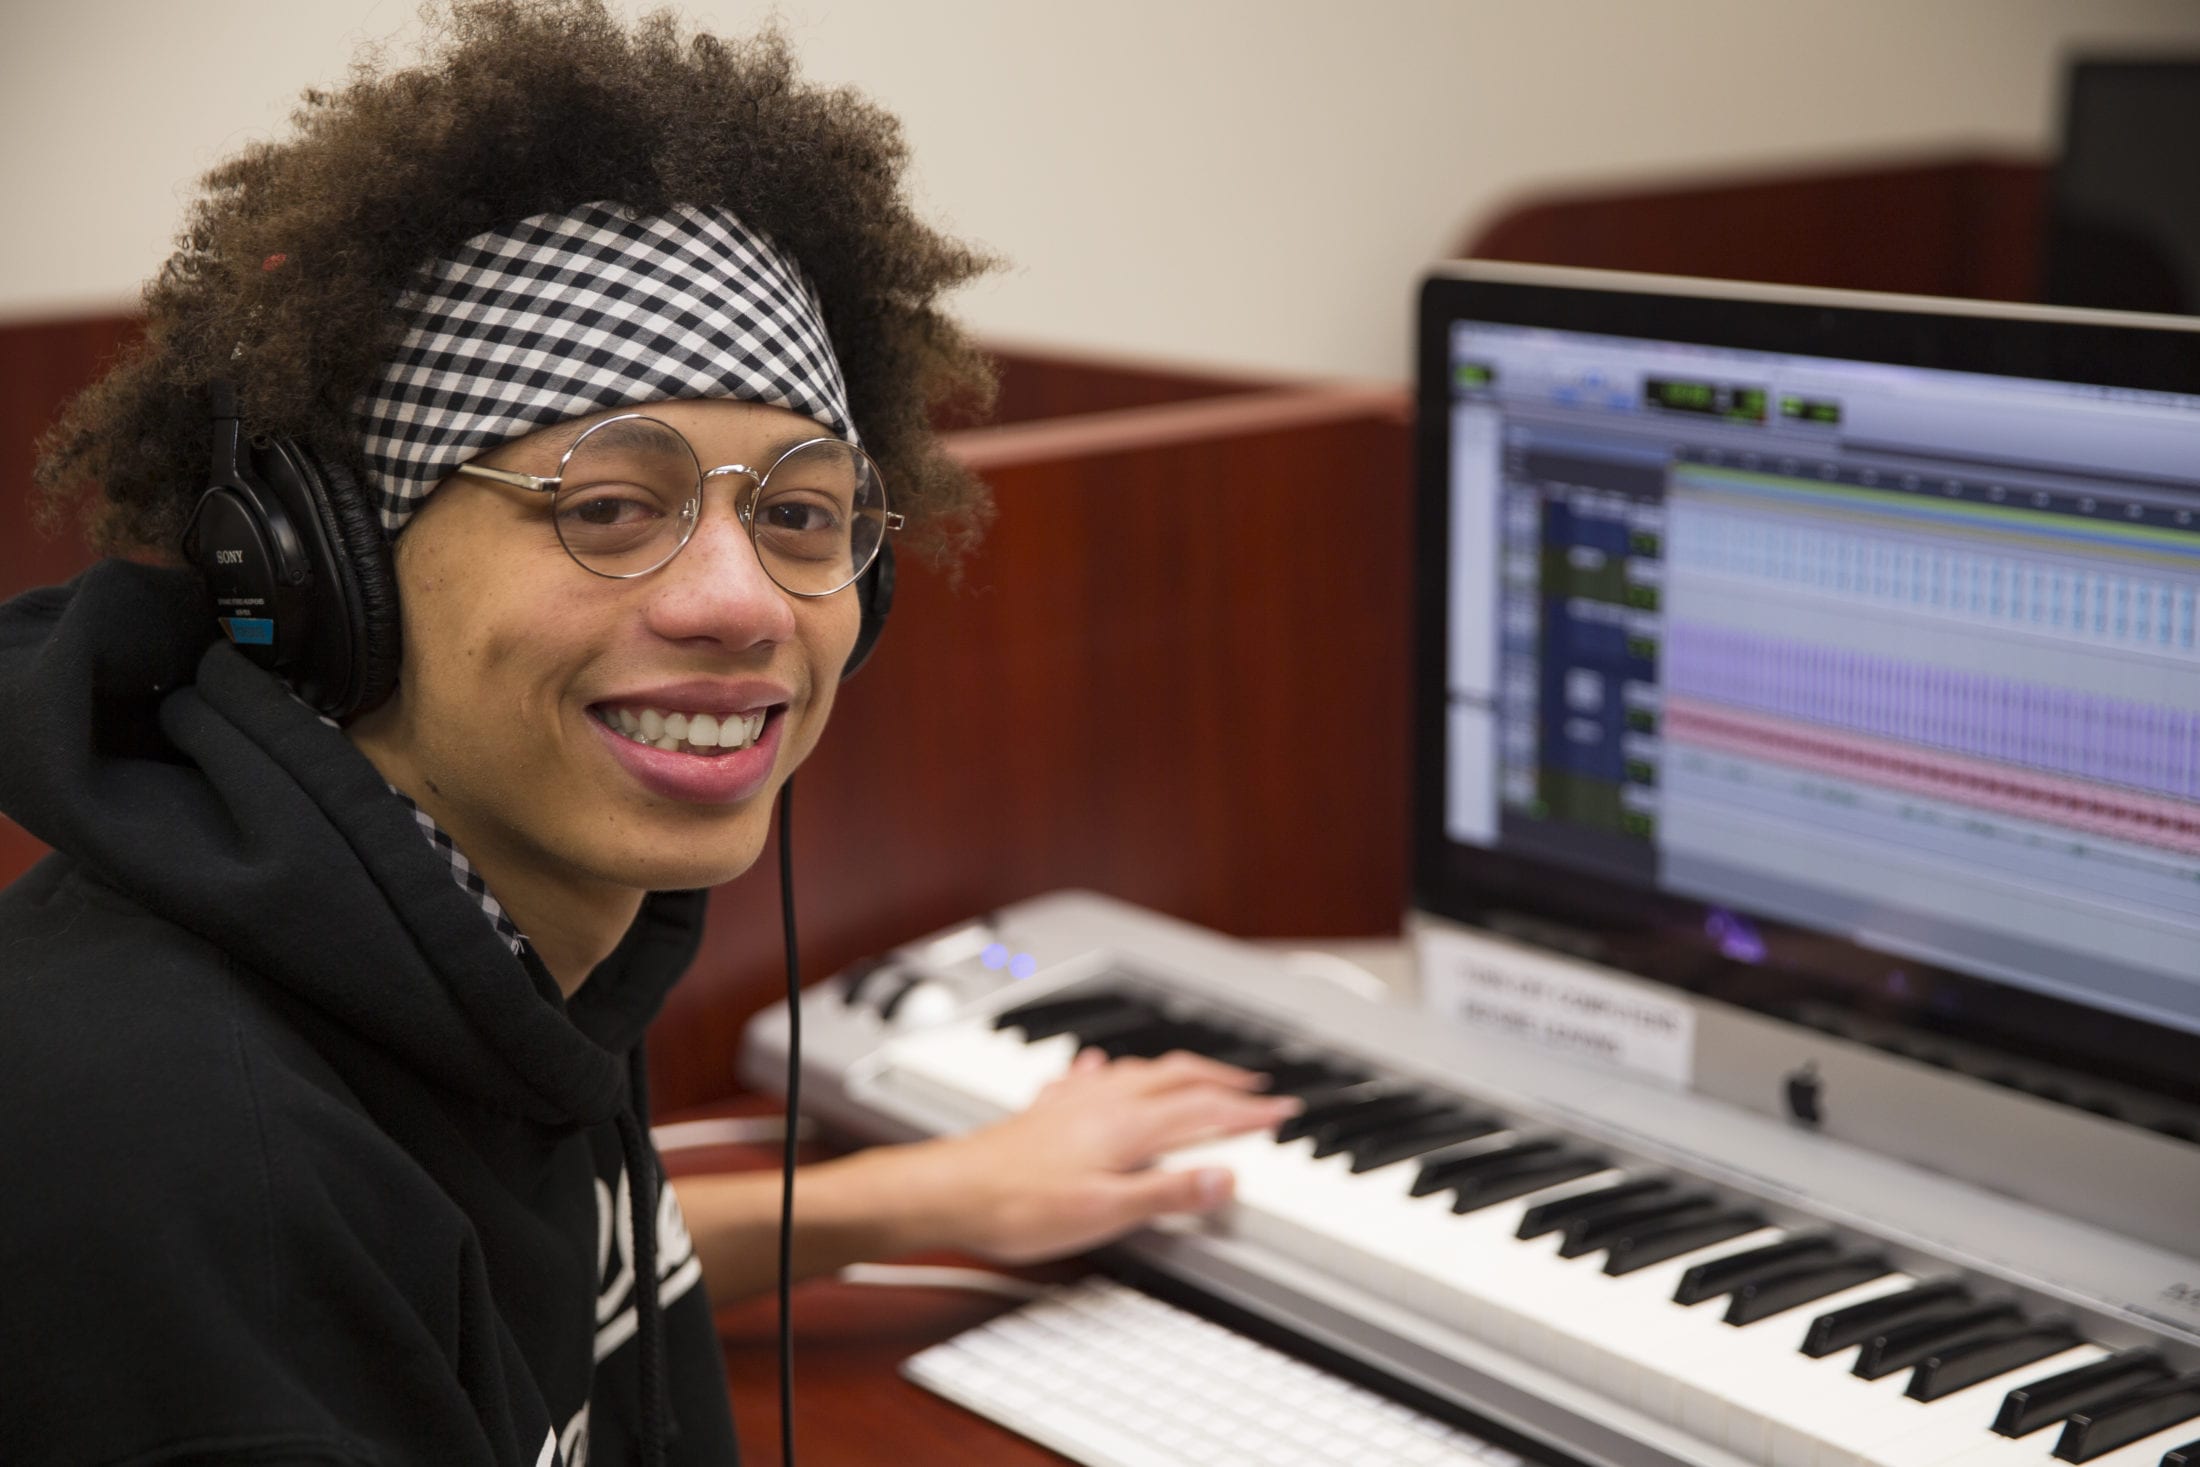 Striking a chord: Brandon changes course to pursue a lifelong passion